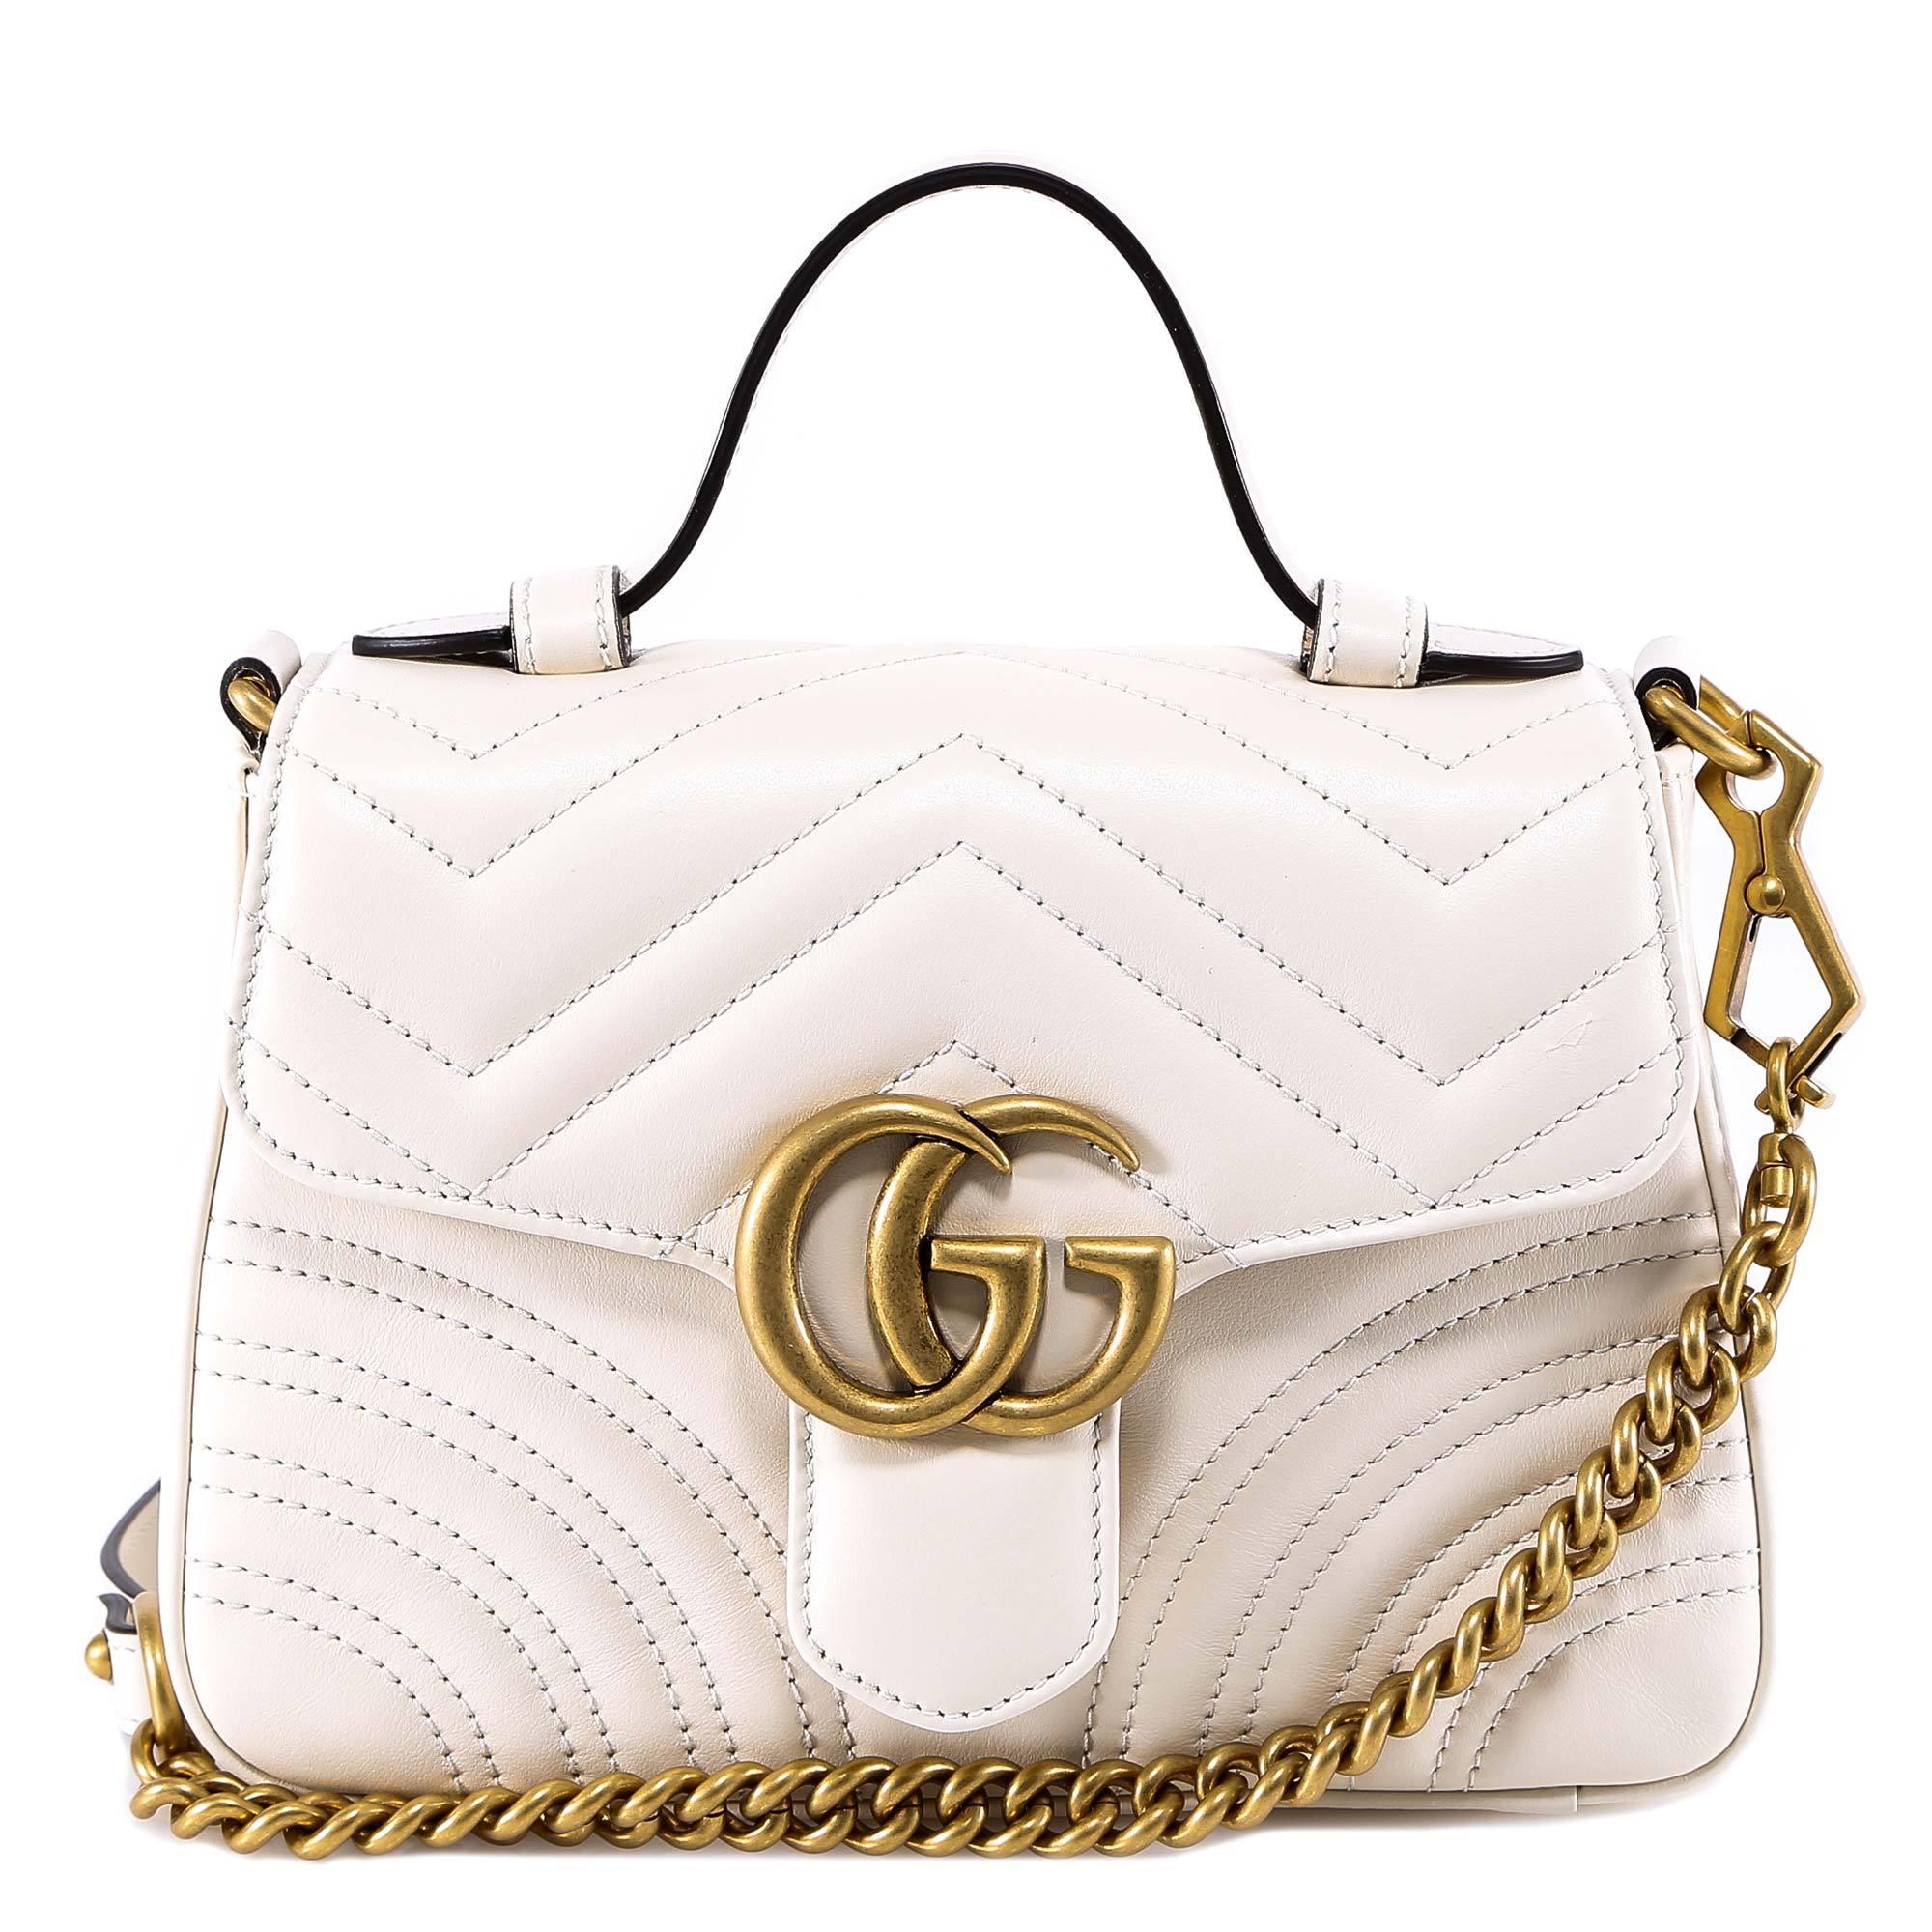 Lyst - Gucci GG Marmont Mini Shoulder Bag in White